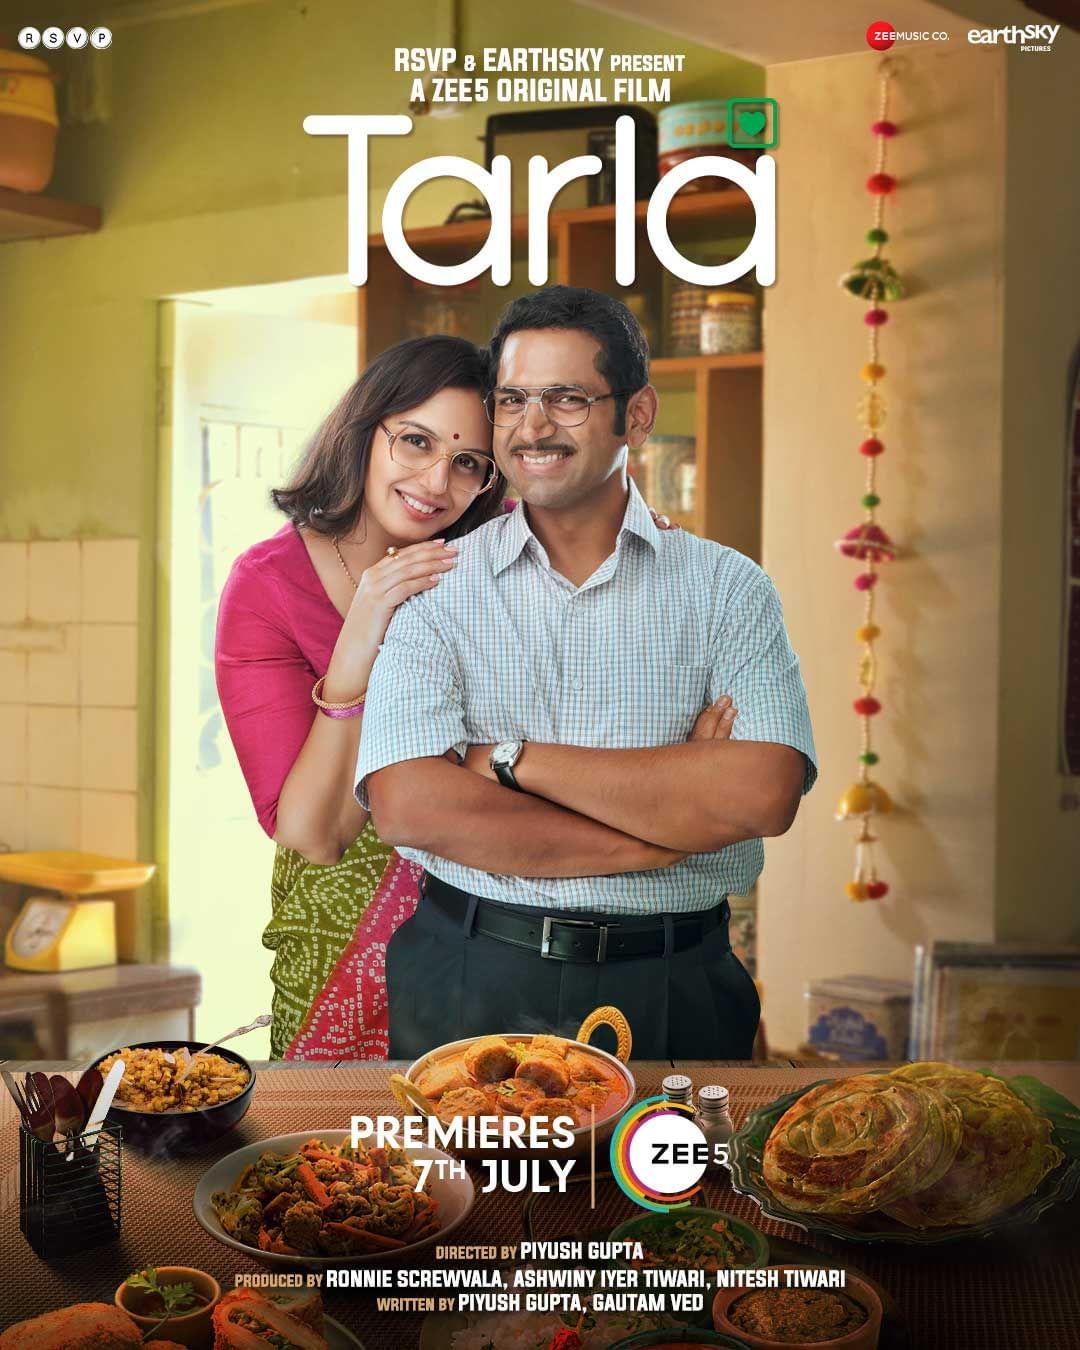 Tarla is a captivating film showcasing the extraordinary life of Tarla Dalal, portrayed by the talented Huma Qureshi. Follow Tarla's inspiring journey as she rises from humble beginnings to become a renowned Indian chef and celebrated cookbook writer.